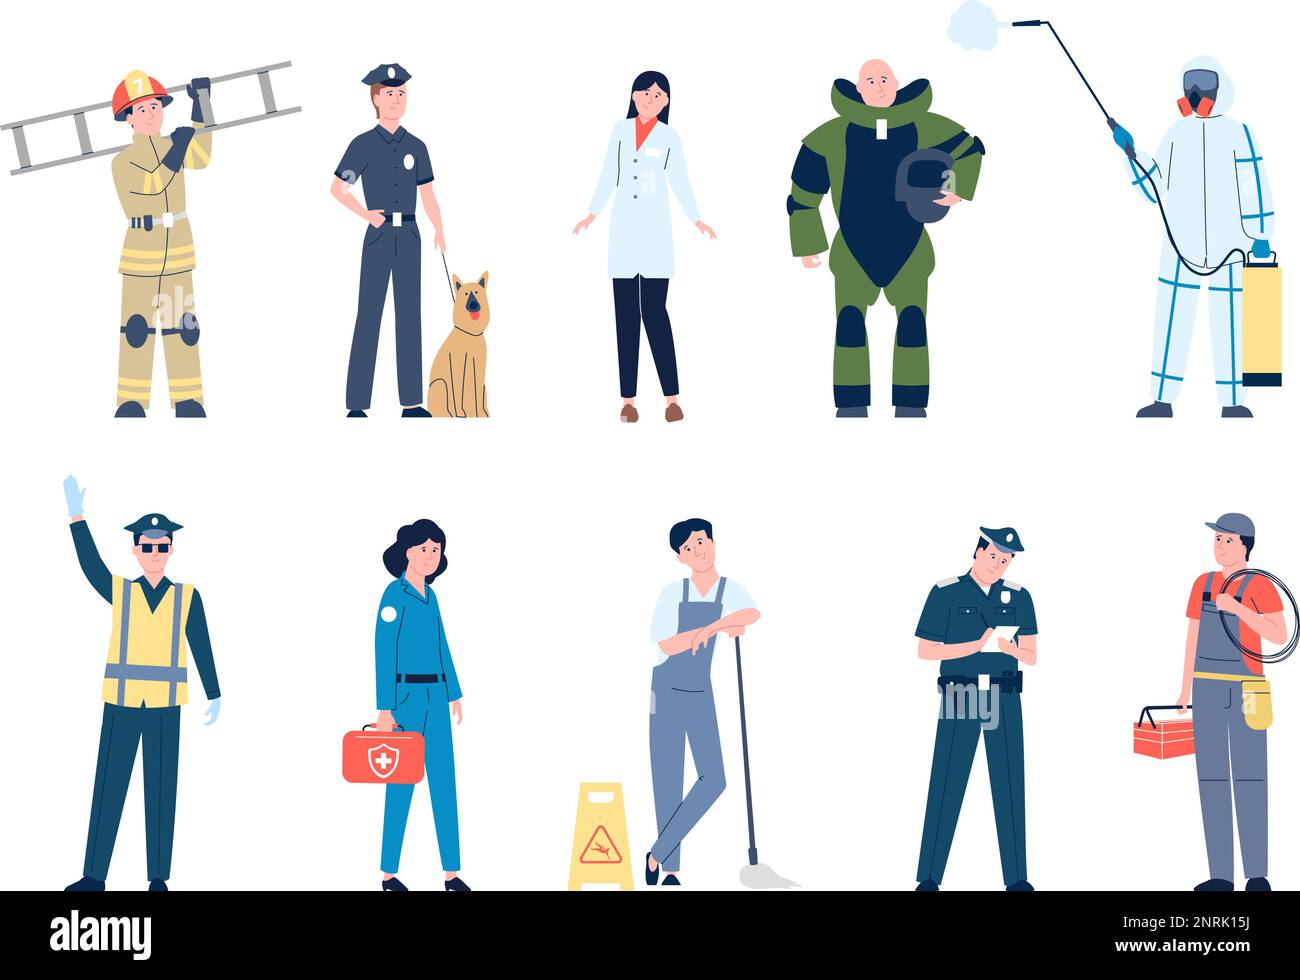 Emergency characters team. Doctors and ambulance workers, policeman with dog, rescue and firemen in uniform. Professionals recent vector set Stock Vector